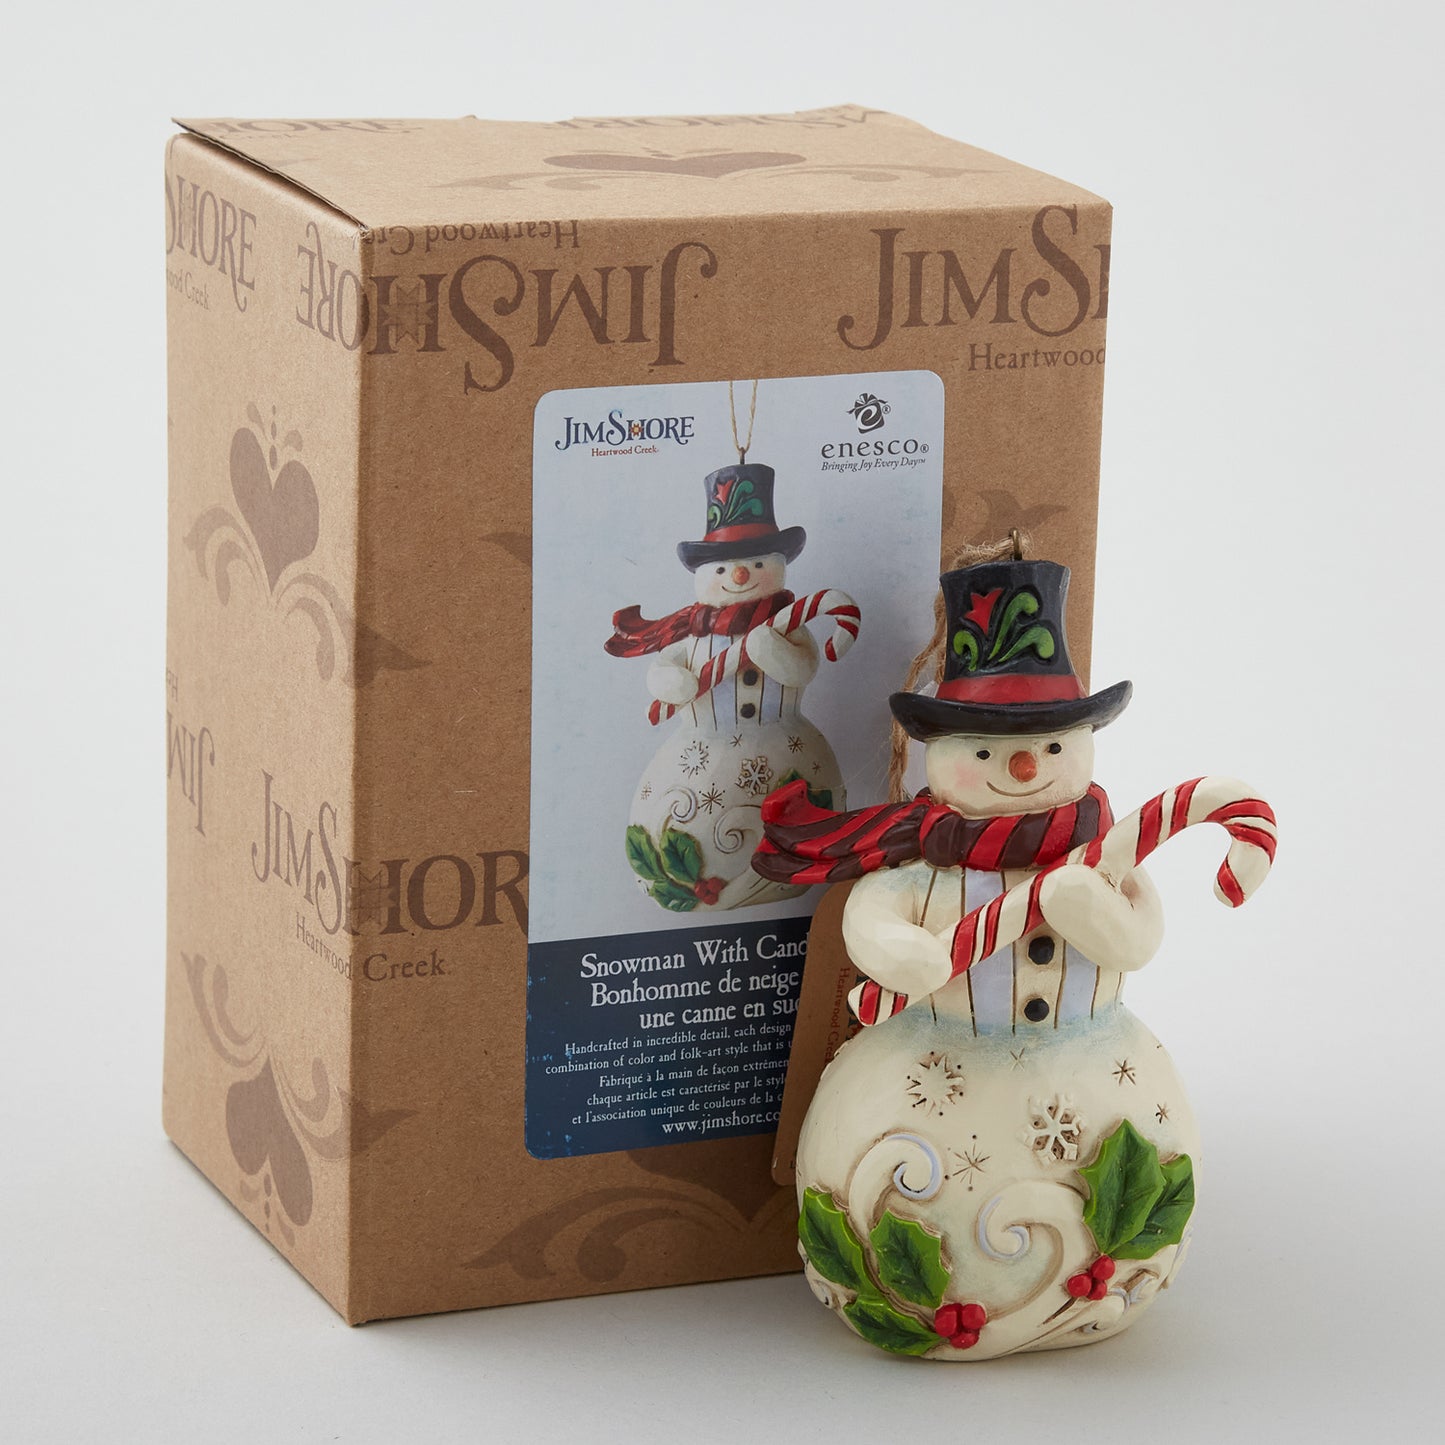 Jim Shore Heartwood Creek Snowman with Candy Cane Ornament Alternative View #1